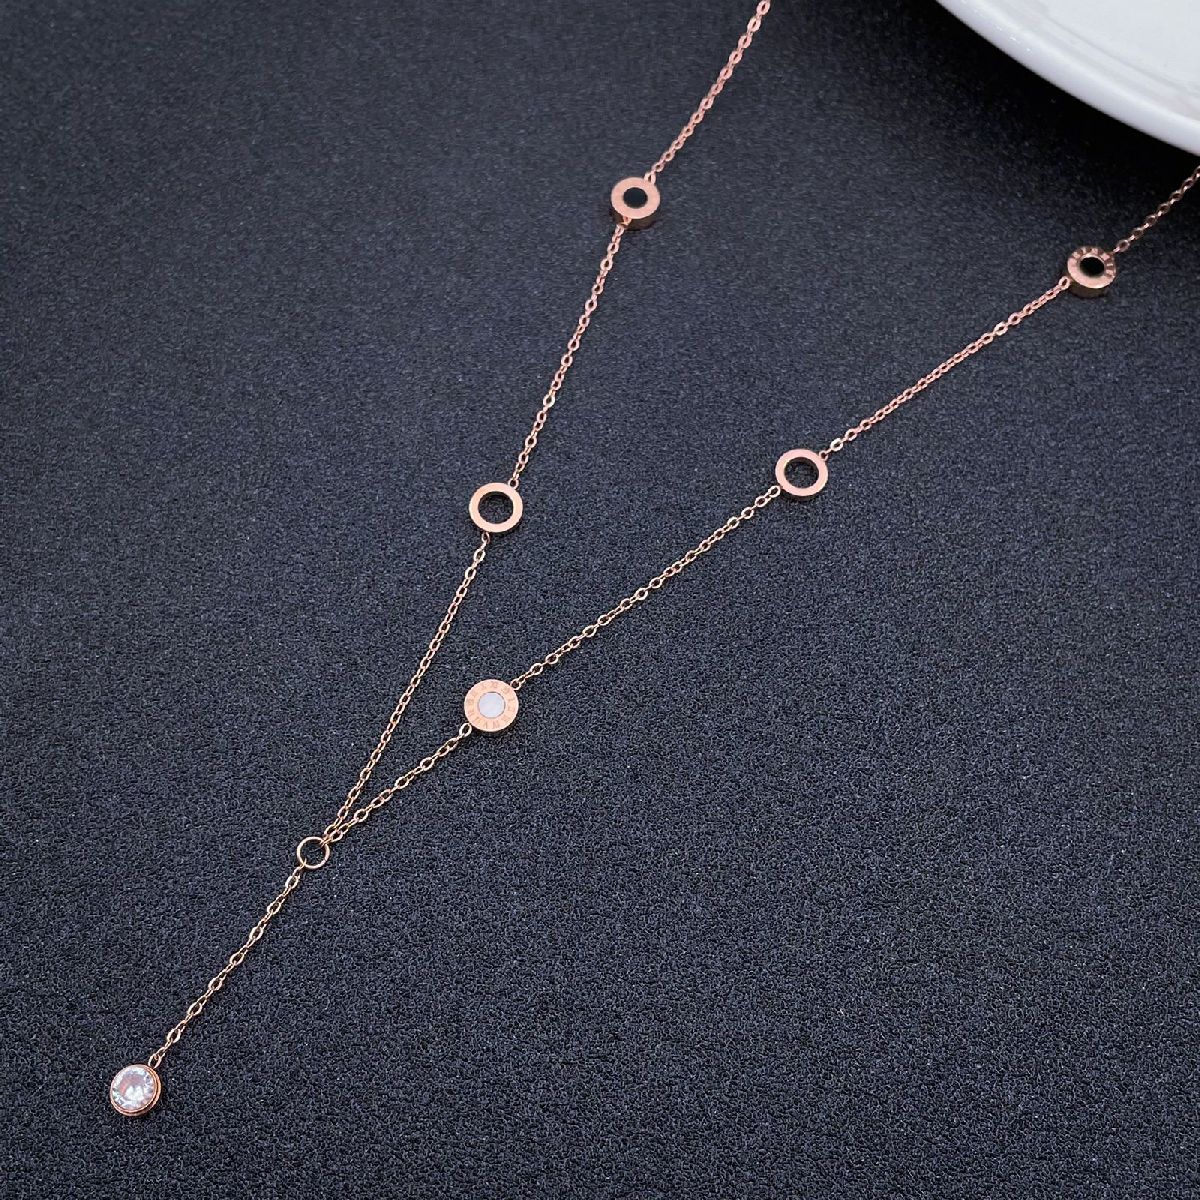 Romen Ring Cz Rose Gold Stainless Steel Necklace Pendant Chain Women